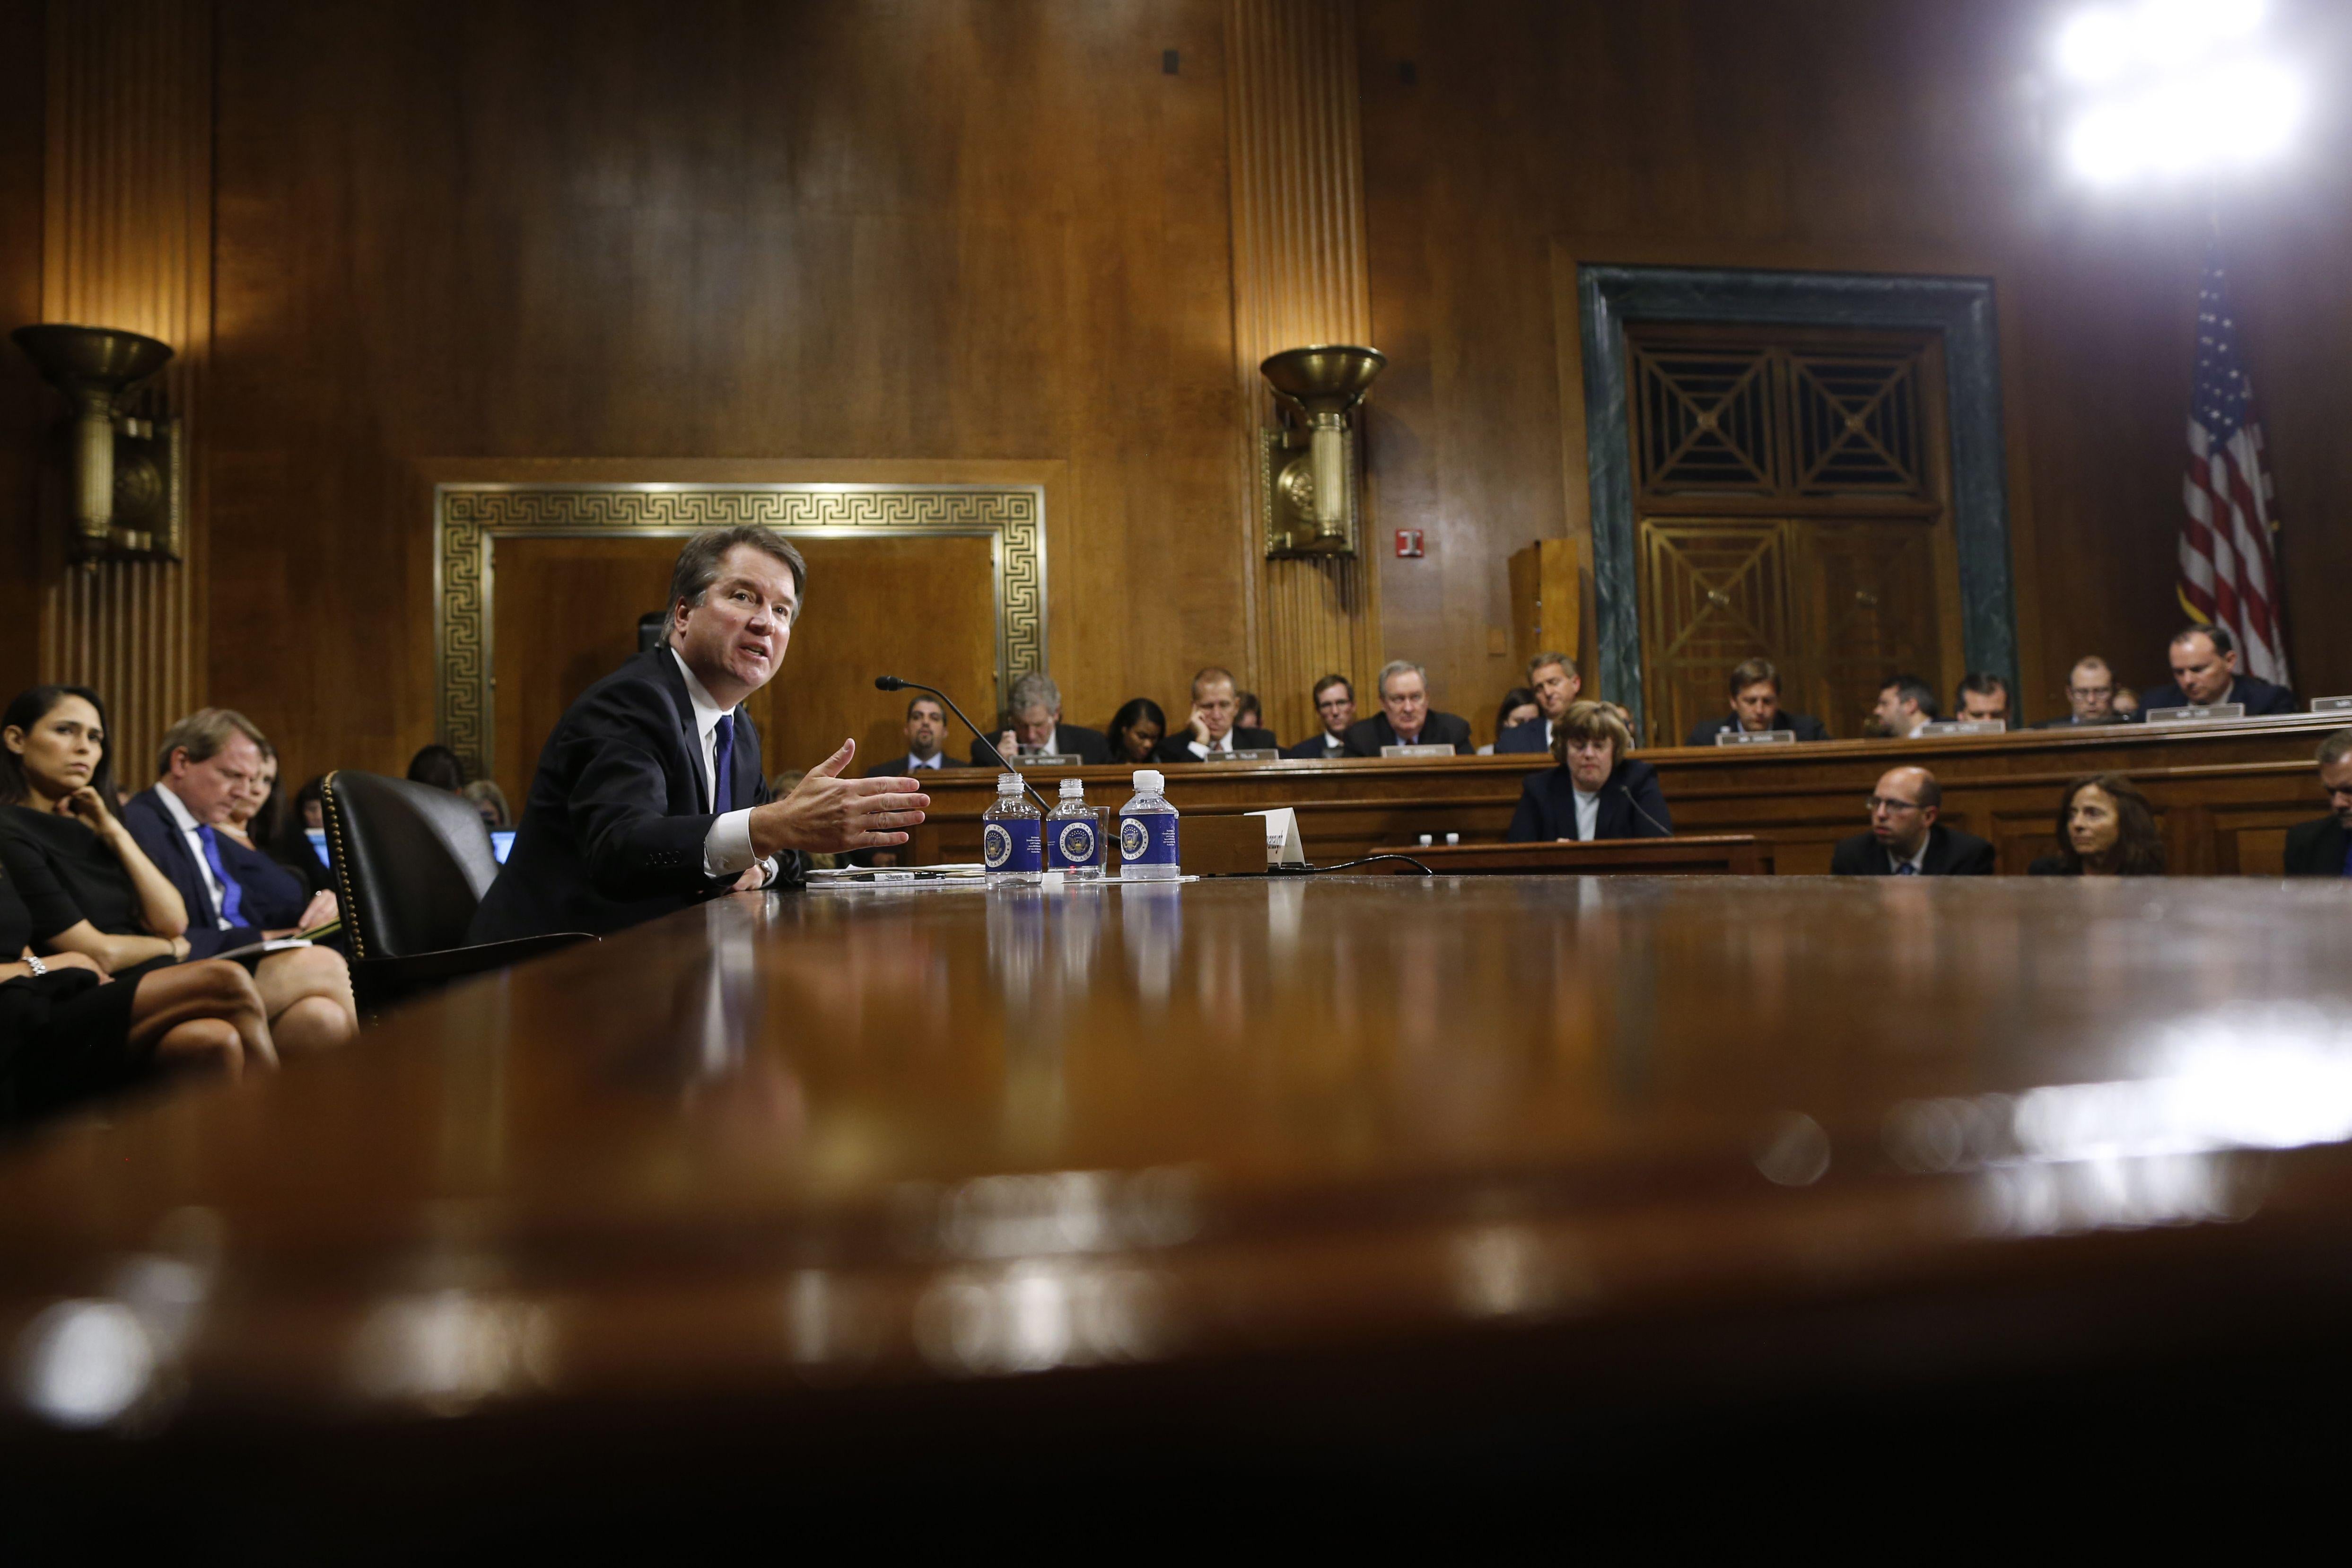 Supreme court nominee Brett Kavanaugh testifies before the Senate Judiciary Committee on Capitol Hill in Washington, DC on September 27, 2018. - University professor Christine Blasey Ford, 51, told a tense Senate Judiciary Committee hearing that could make or break Kavanaugh's nomination she was '100 percent' certain he was the assailant and it was 'absolutely not' a case of mistaken identify. (Photo by MICHAEL REYNOLDS / POOL / AFP)        (Photo credit should read MICHAEL REYNOLDS/AFP/Getty Images)